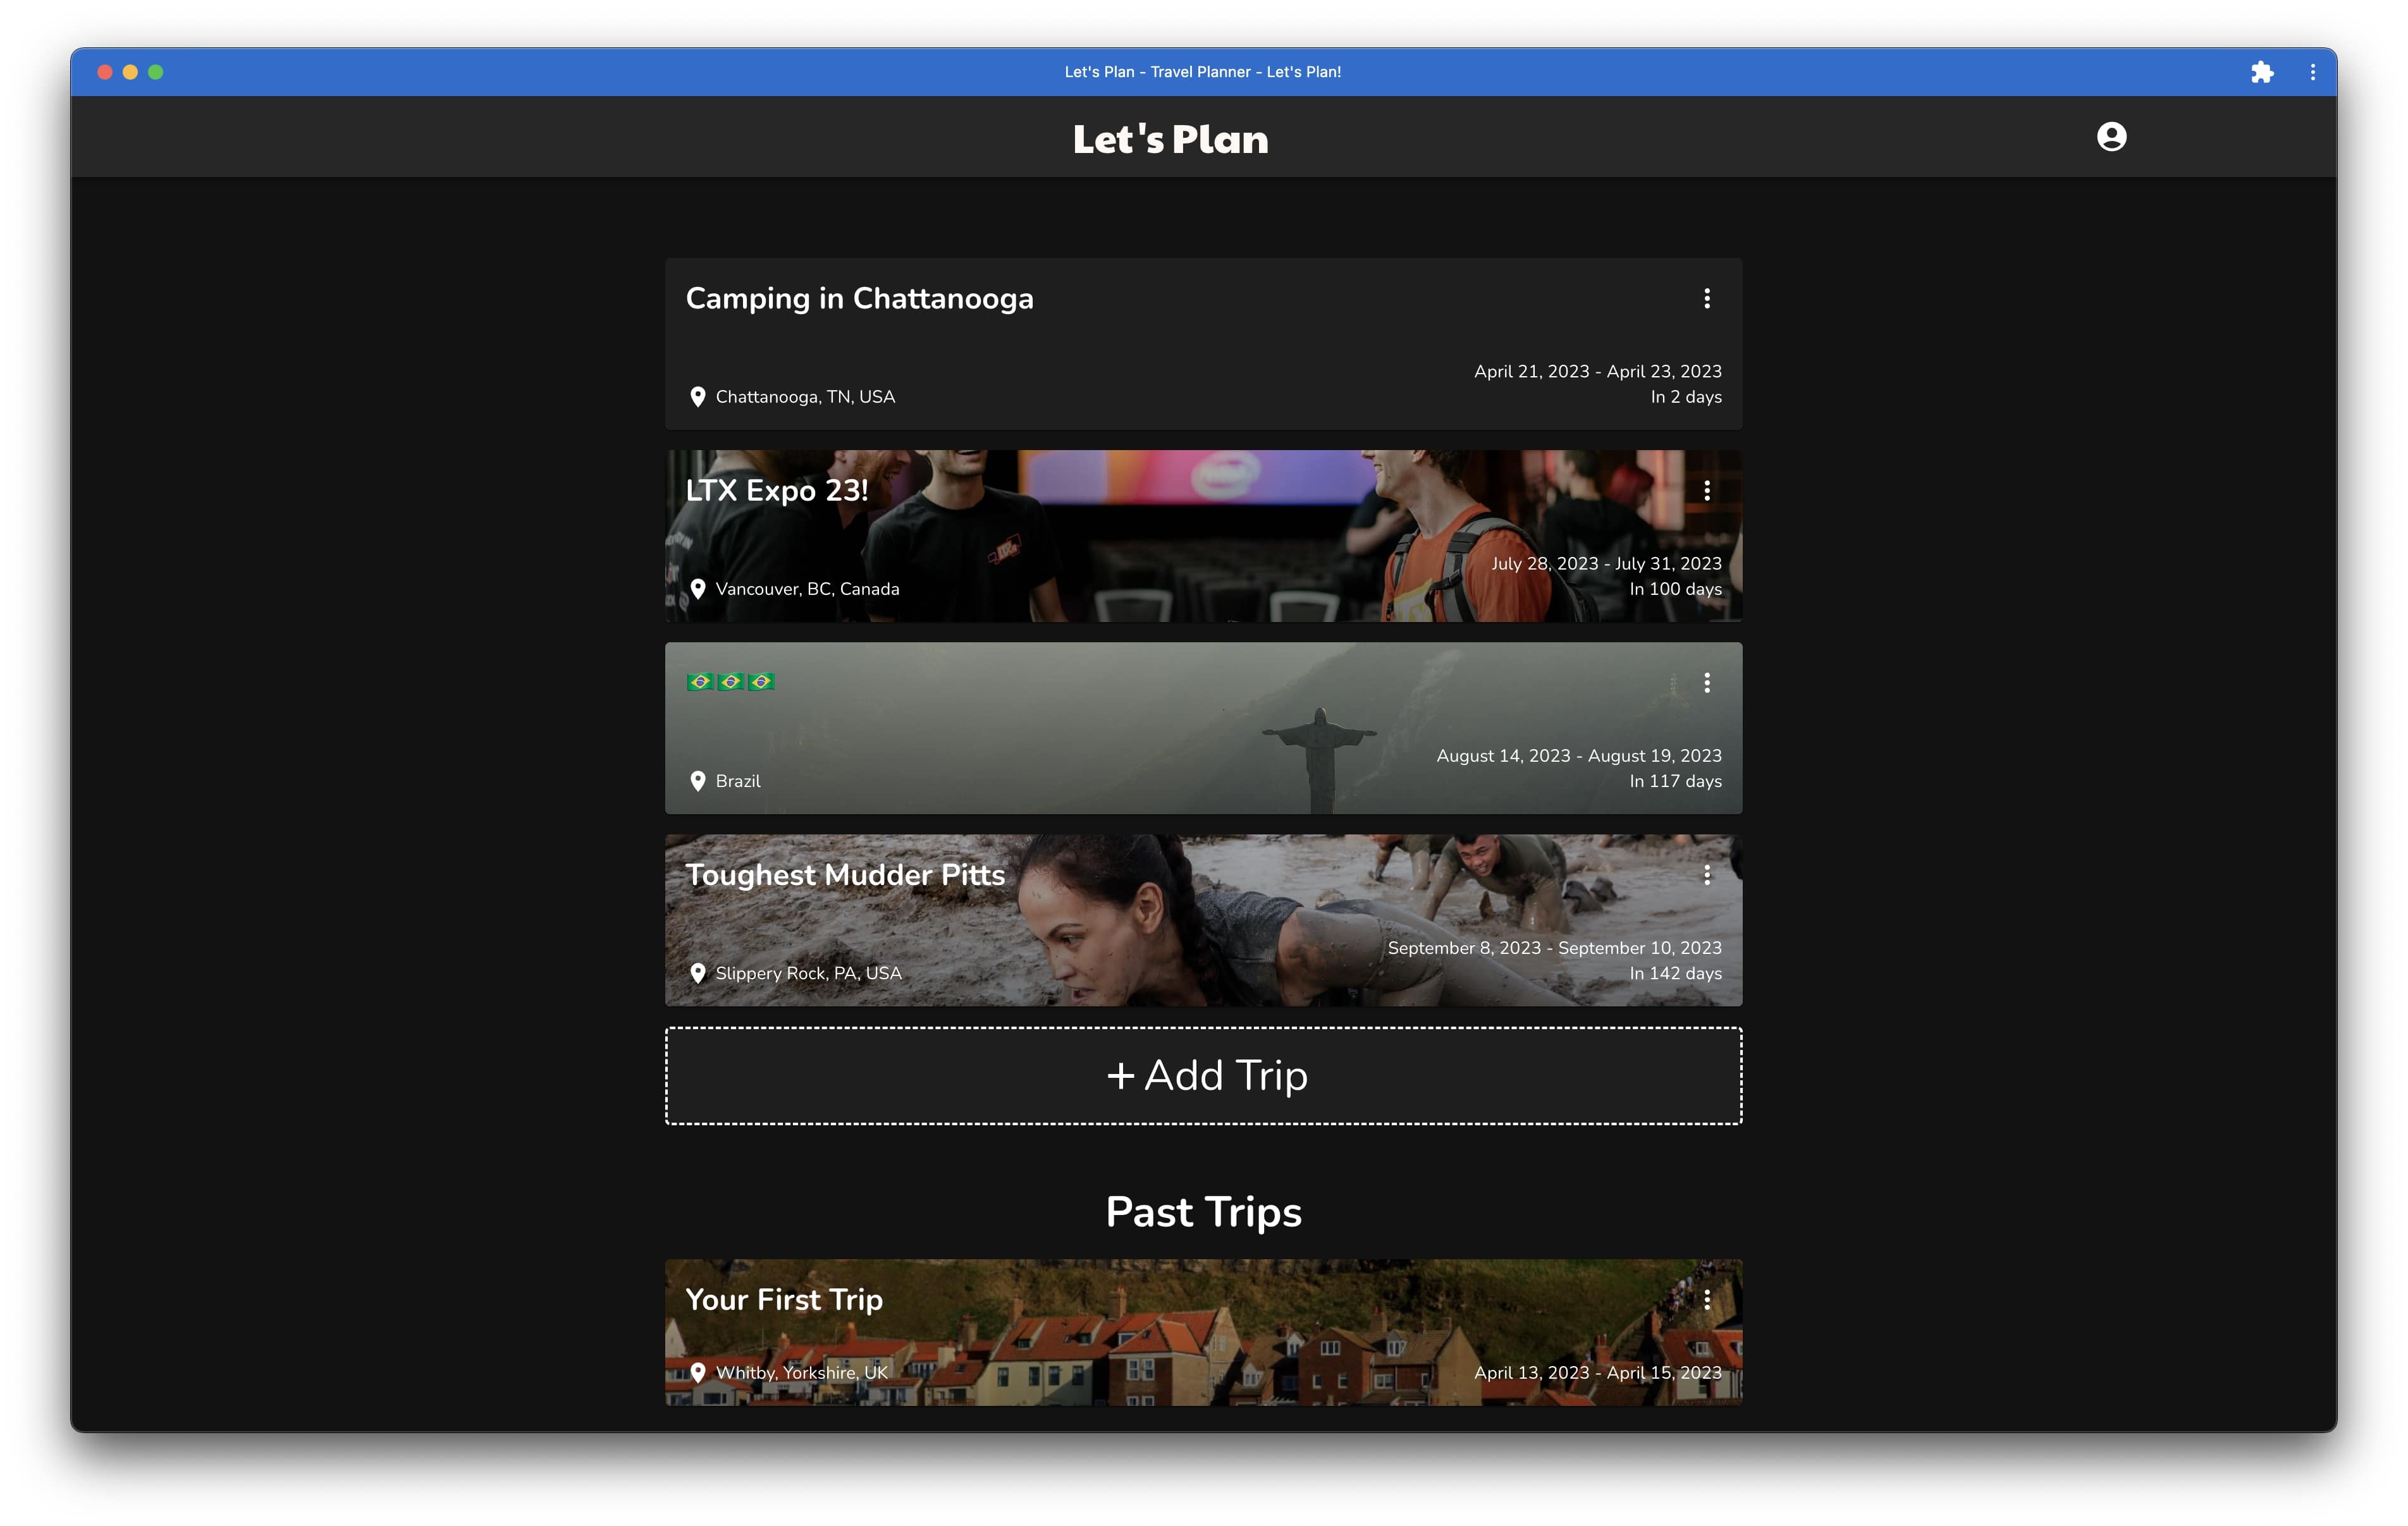 The homepage of Let's Plan, with a list of trips